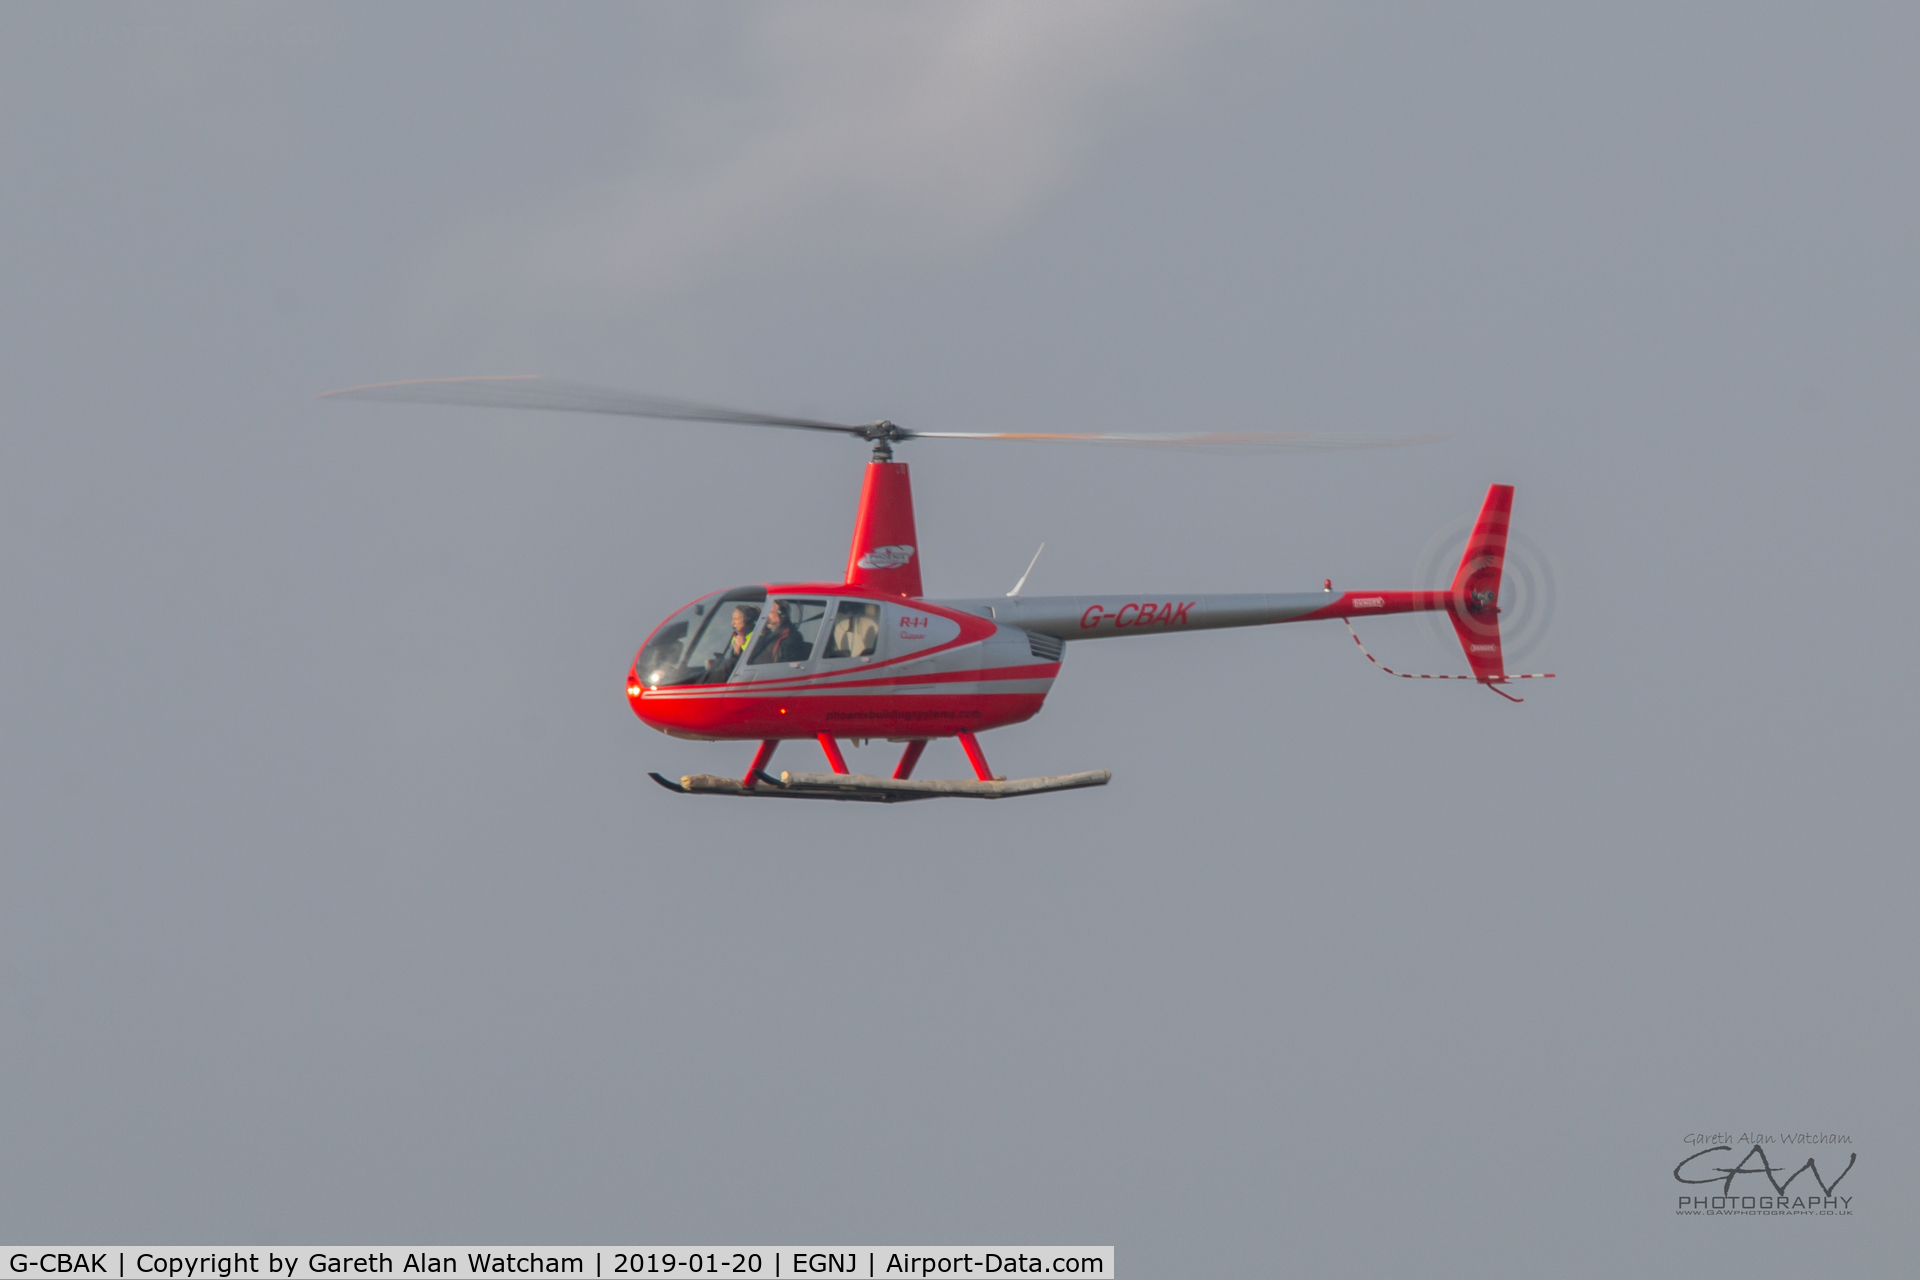 G-CBAK, 2001 Robinson R44 Clipper C/N 1089, Operating out of Humberside